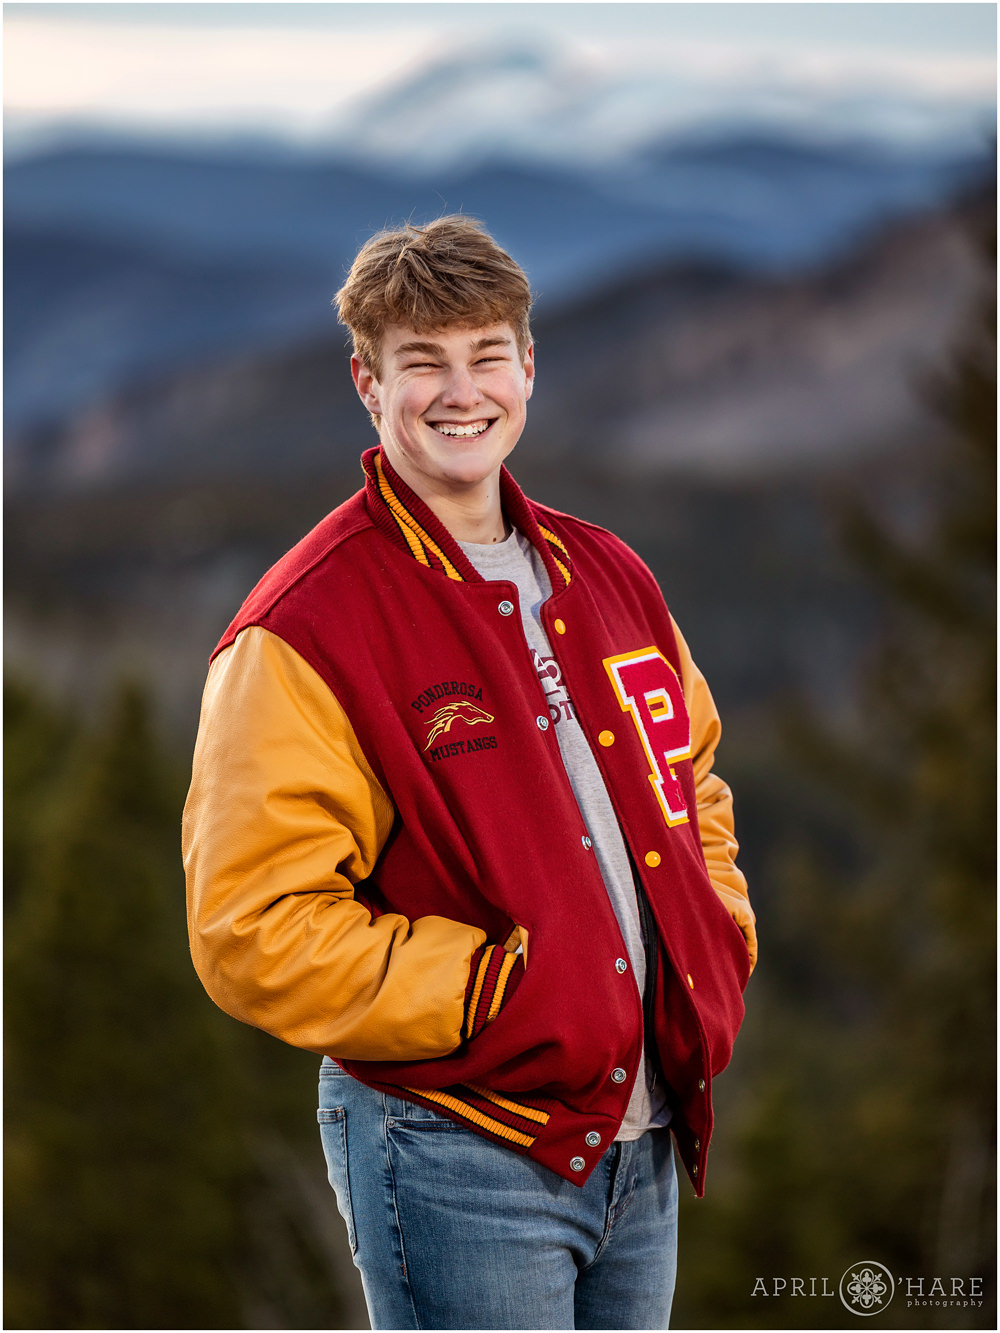 High School Senior Boy wearing a Ponderosa High School Mustangs Letter Jacket in Red and Yellow with Blue Mountain Backdrop in Evergreen Colorado